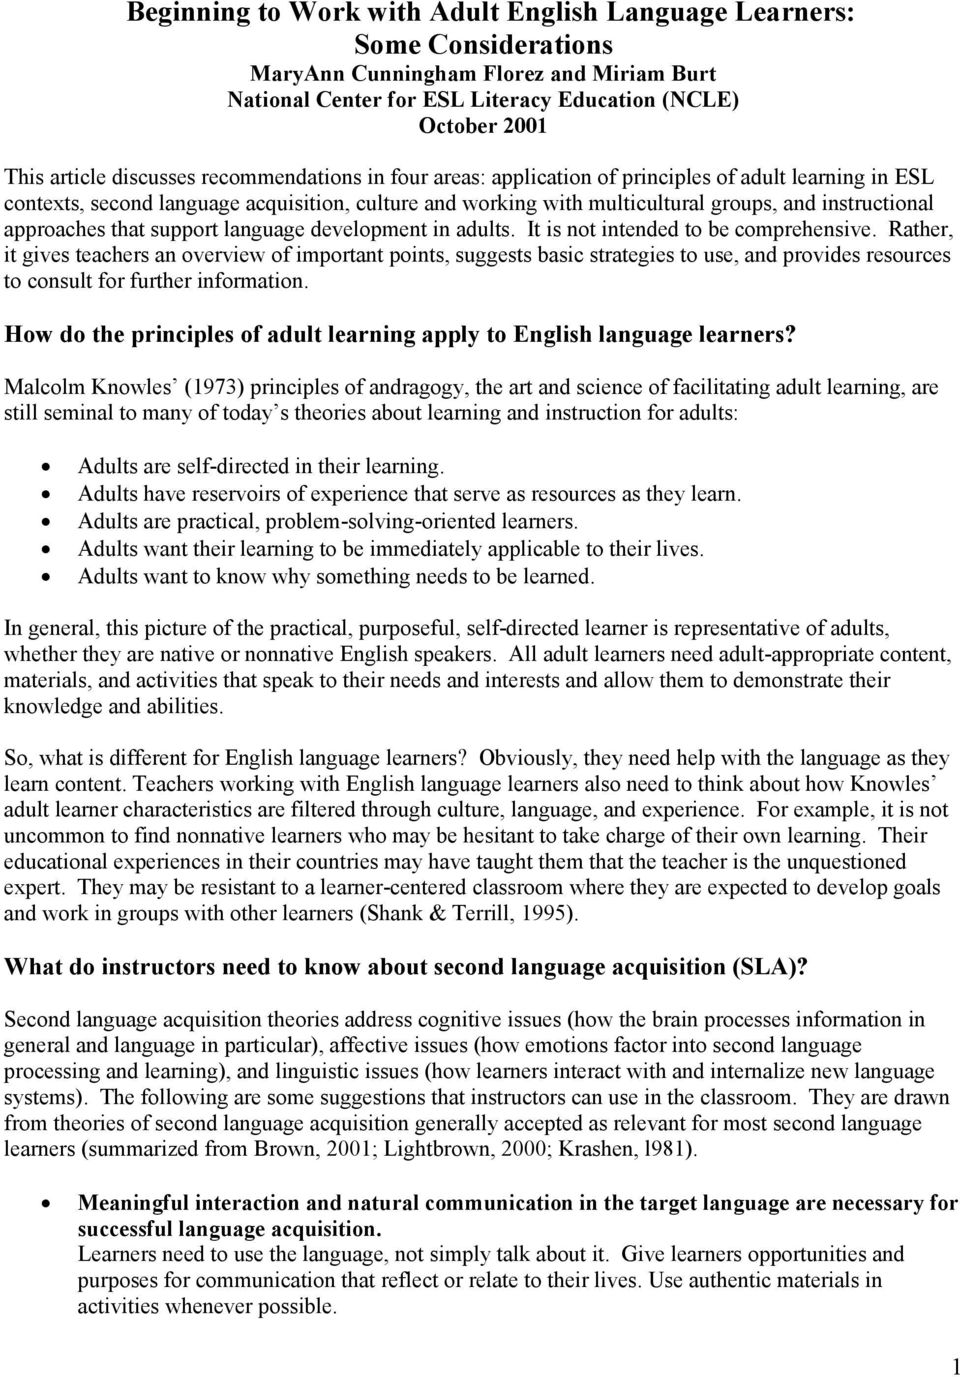 approaches that support language development in adults. It is not intended to be comprehensive.